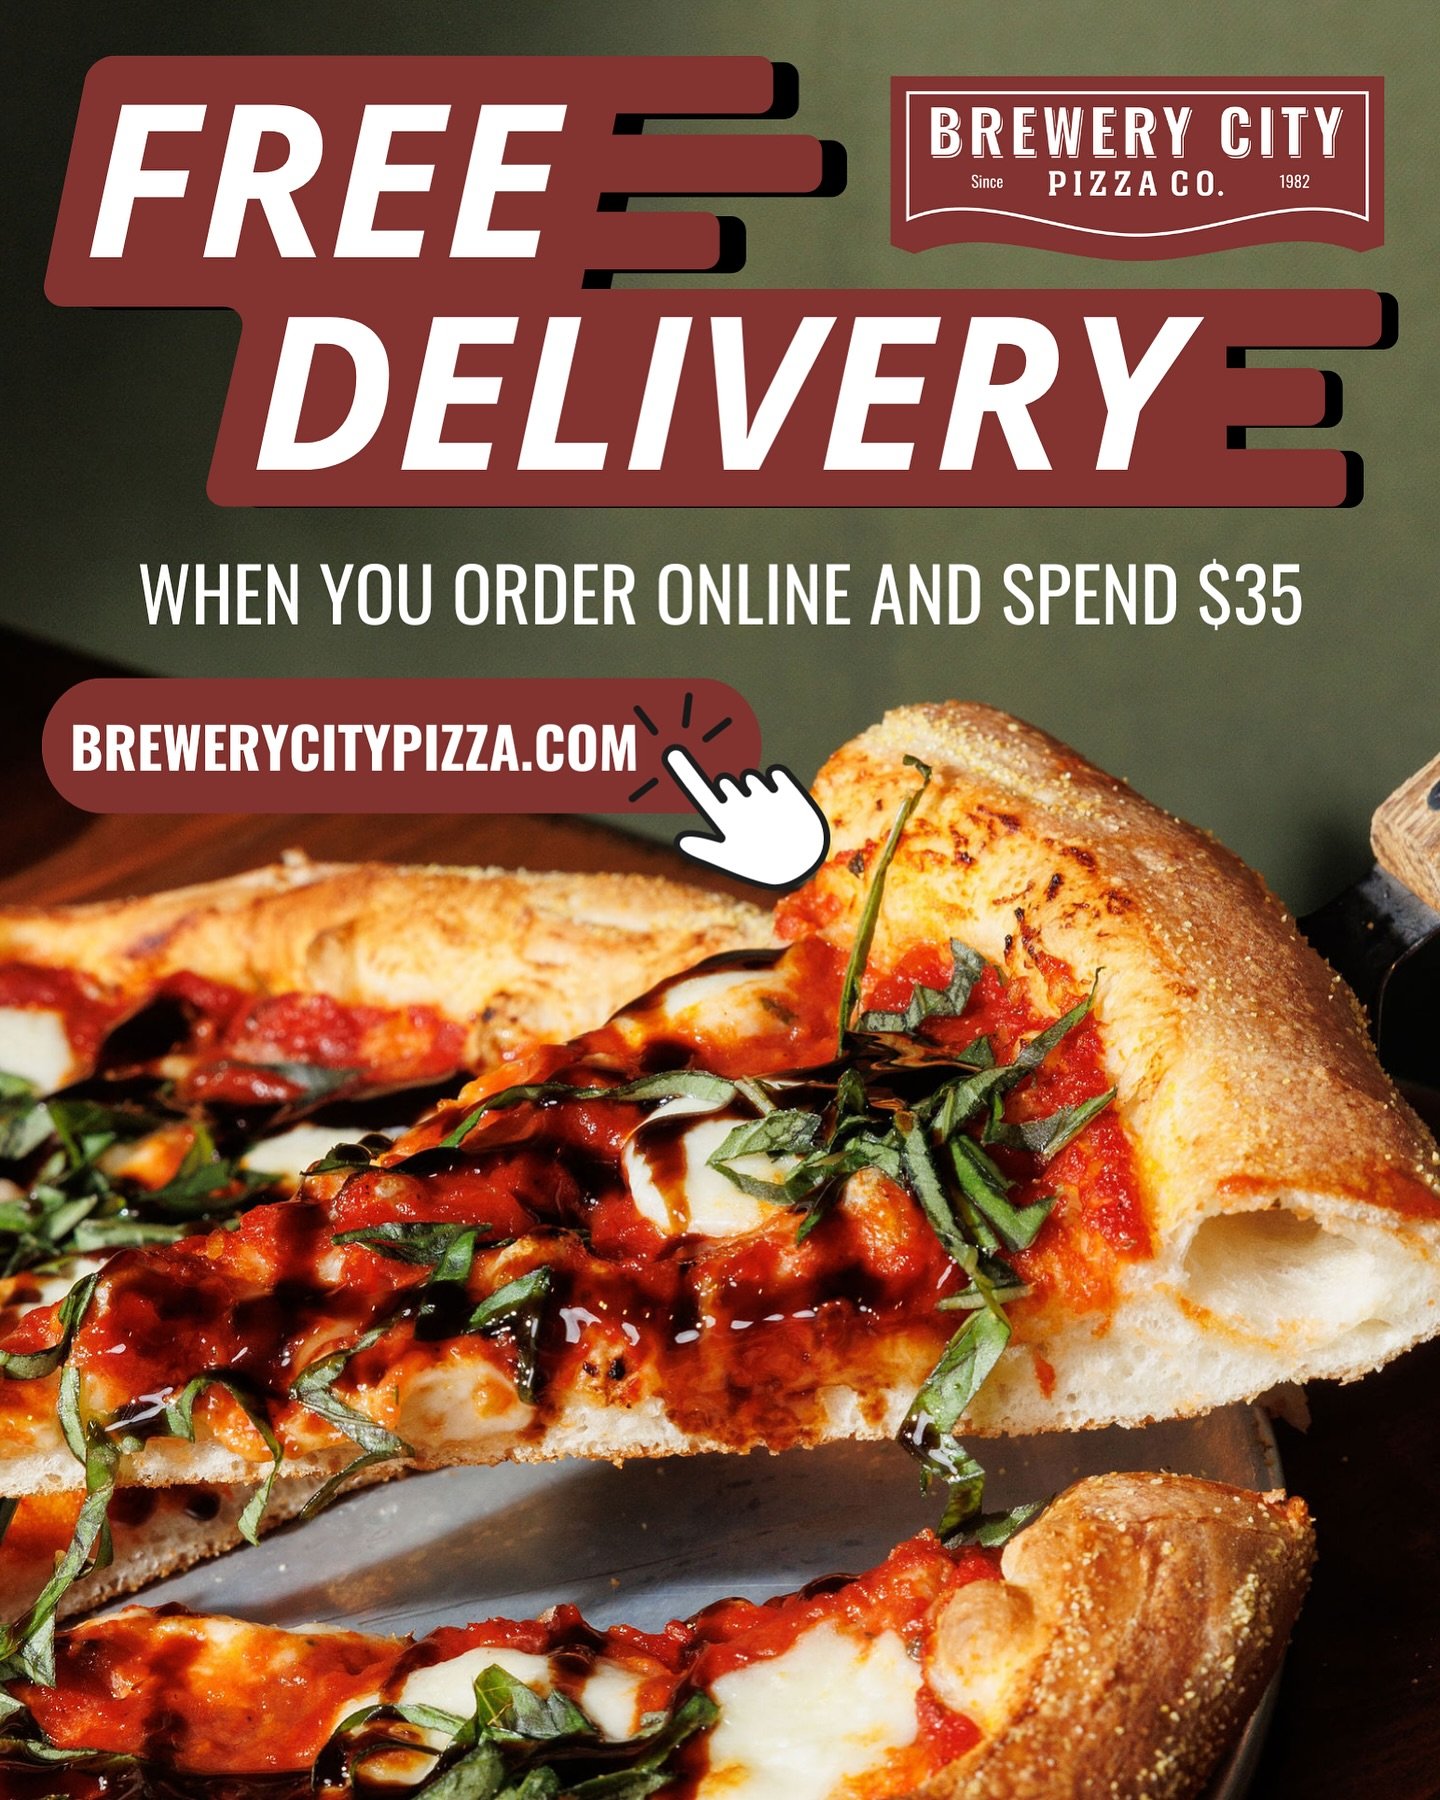 🚨 FREE DELIVERY!! 🚨 You can now enjoy easy online ordering for delivery or pickup through our website! For a limited time, we&rsquo;re offering free delivery for orders over $35. Link in bio 🚚 🍕